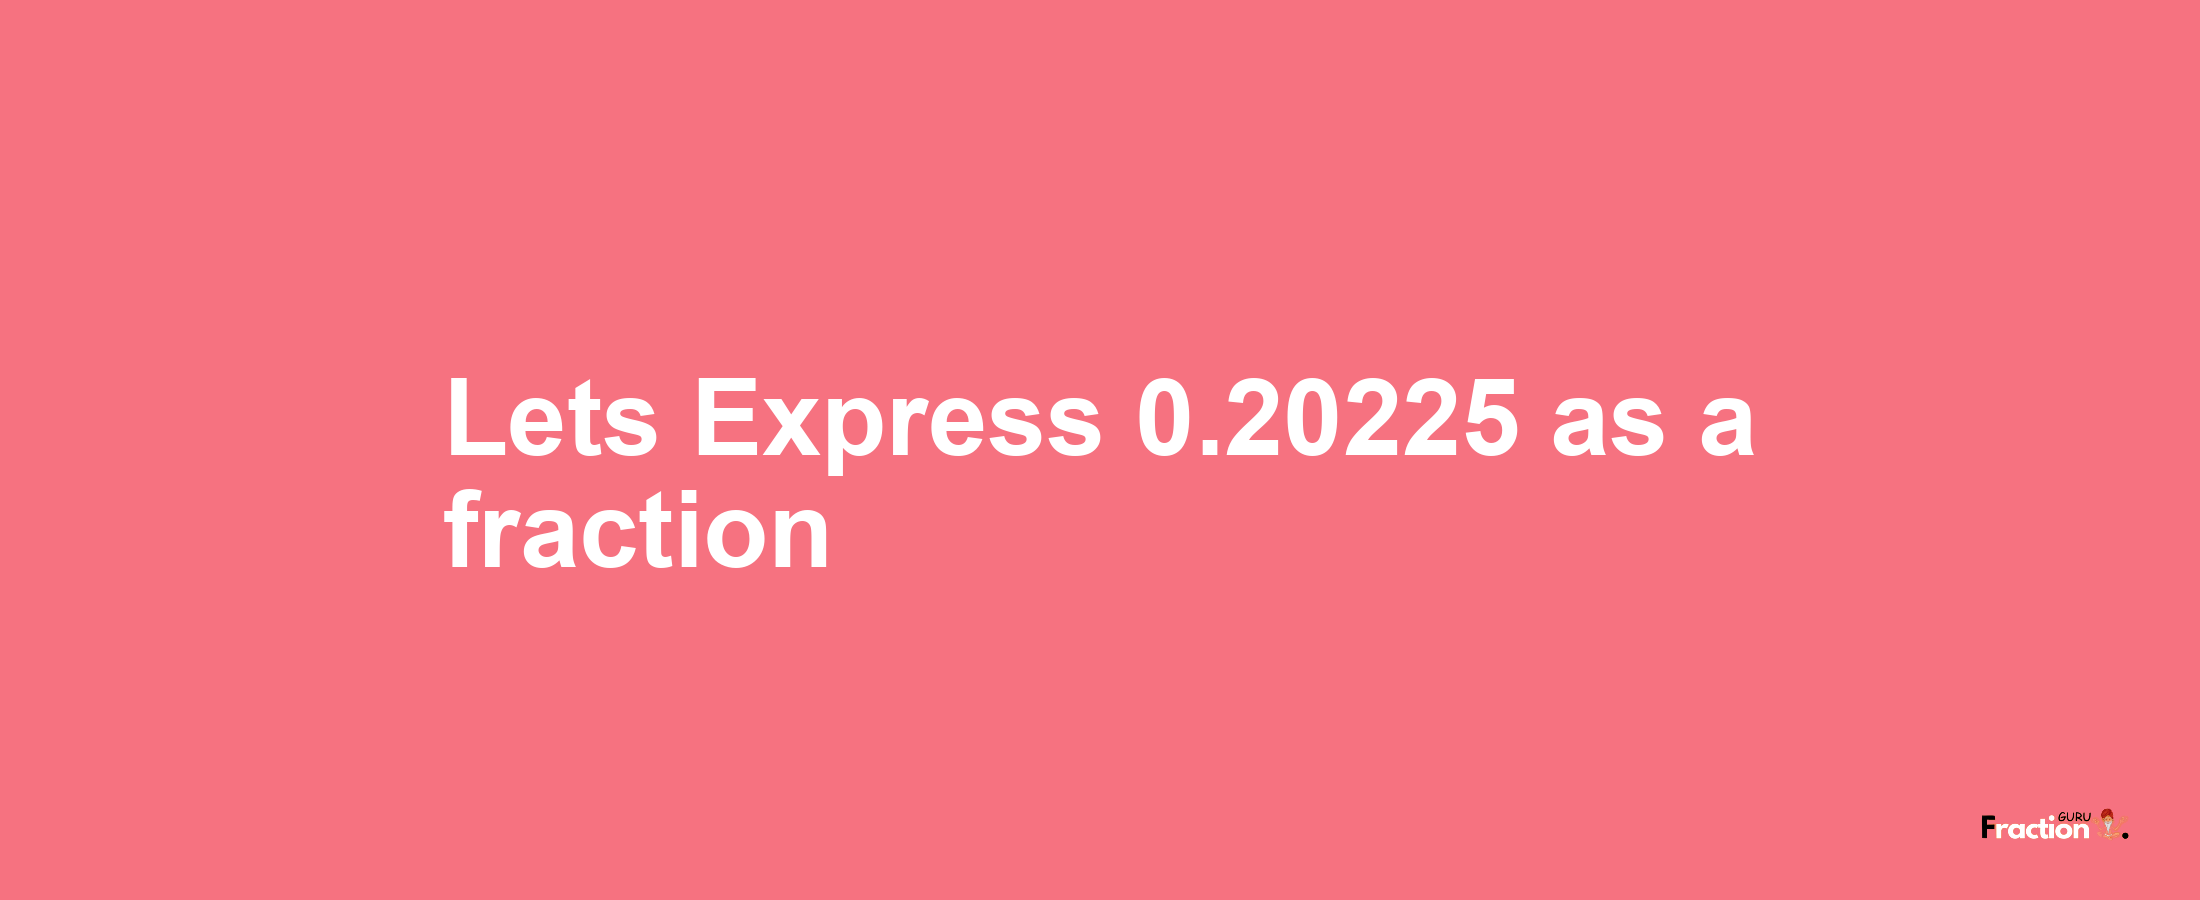 Lets Express 0.20225 as afraction